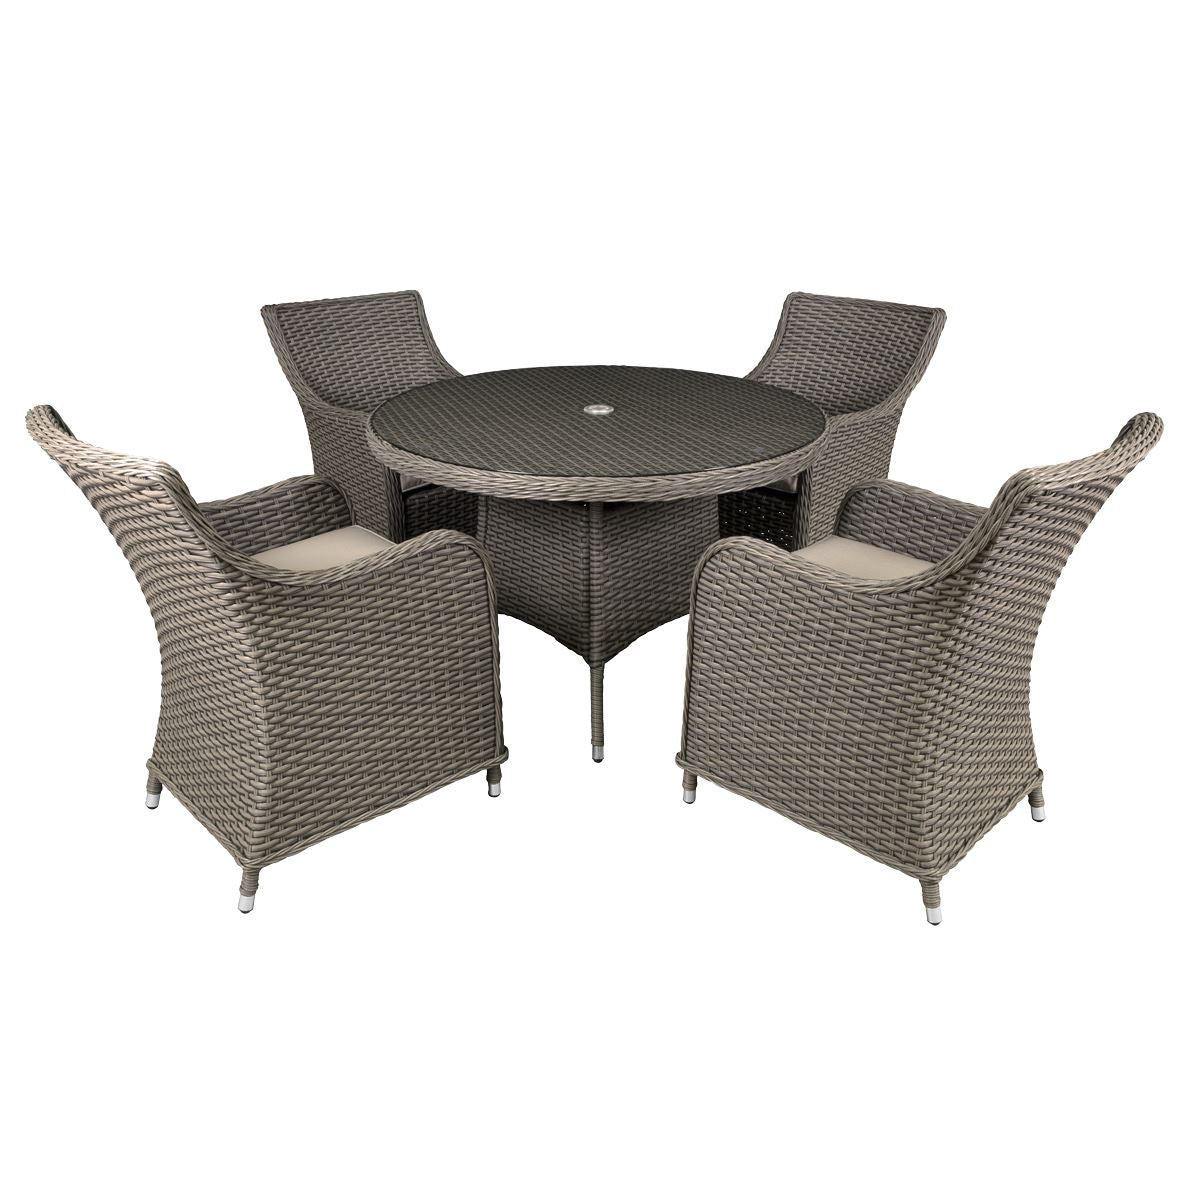 Dellonda Chester 5-Piece Rattan Wicker Outdoor Dining Set with Tempered Glass Table Top, Brown